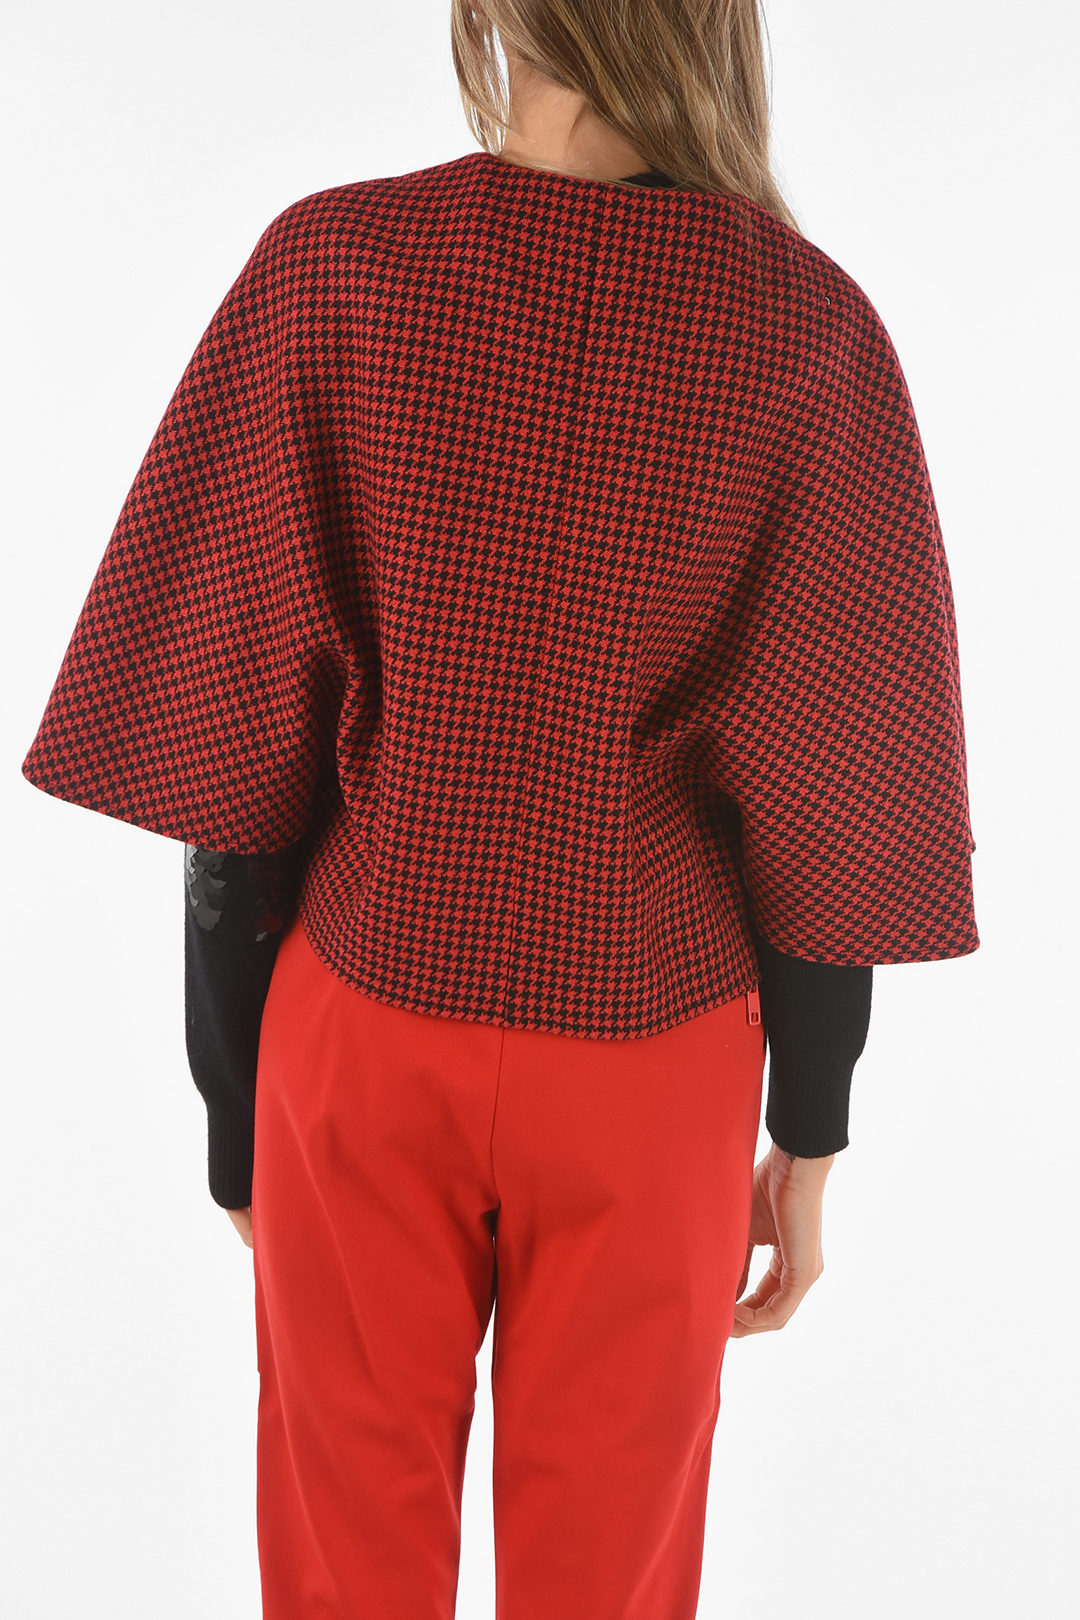 spellen briefpapier Demonstreer Red Valentino Houndstooth Wool Cropped Cape women - Glamood Outlet